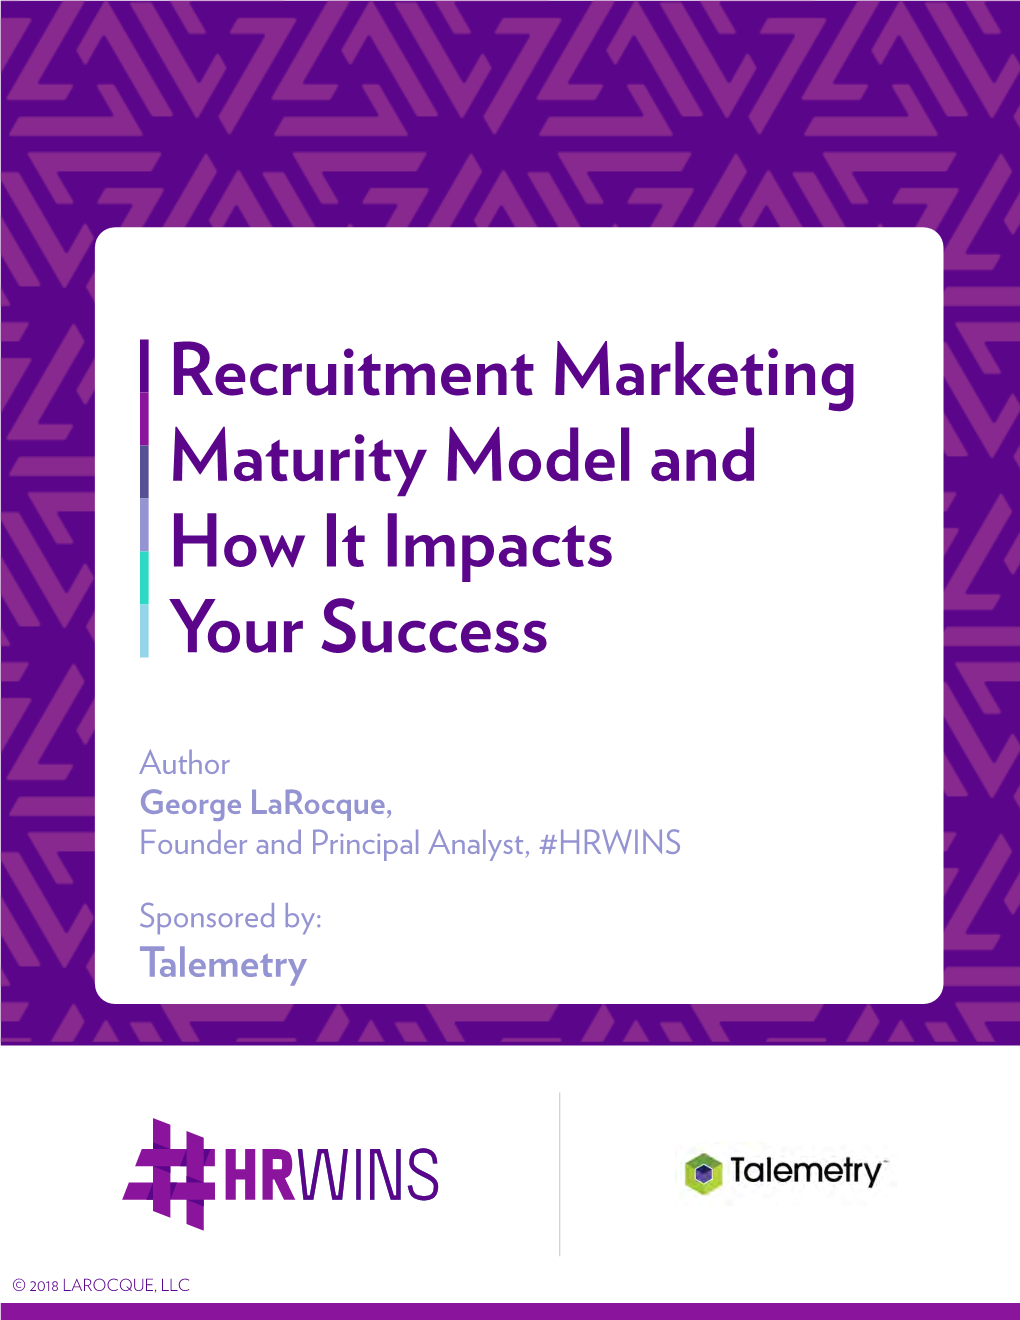 Recruitment Marketing Maturity Model and How It Impacts Your Success